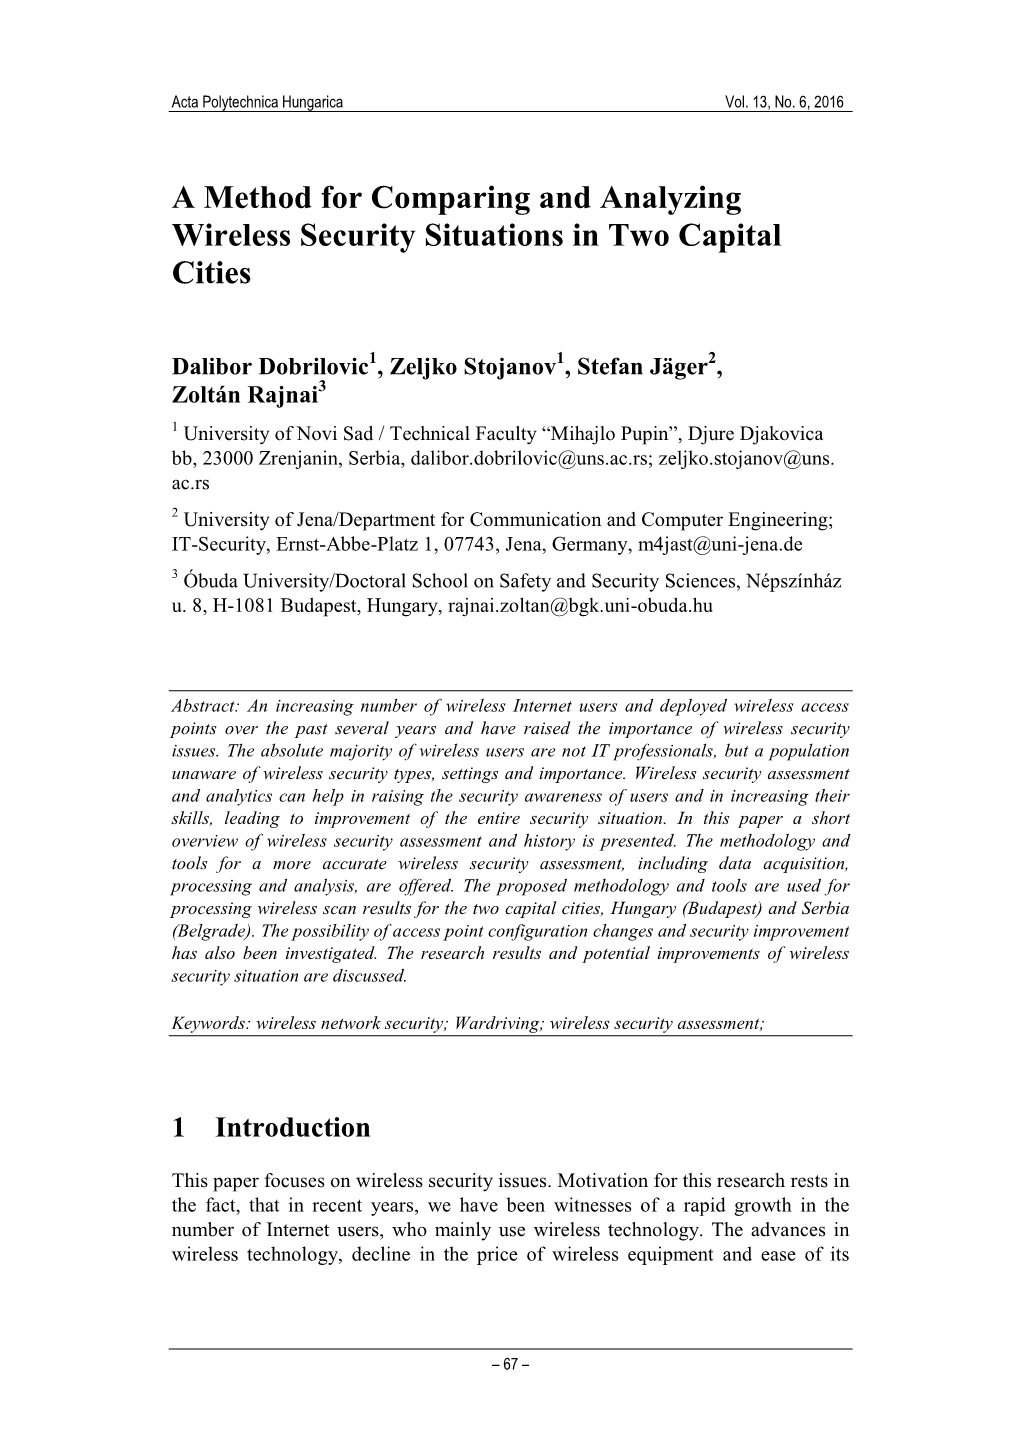 A Method for Comparing and Analyzing Wireless Security Situations in Two Capital Cities